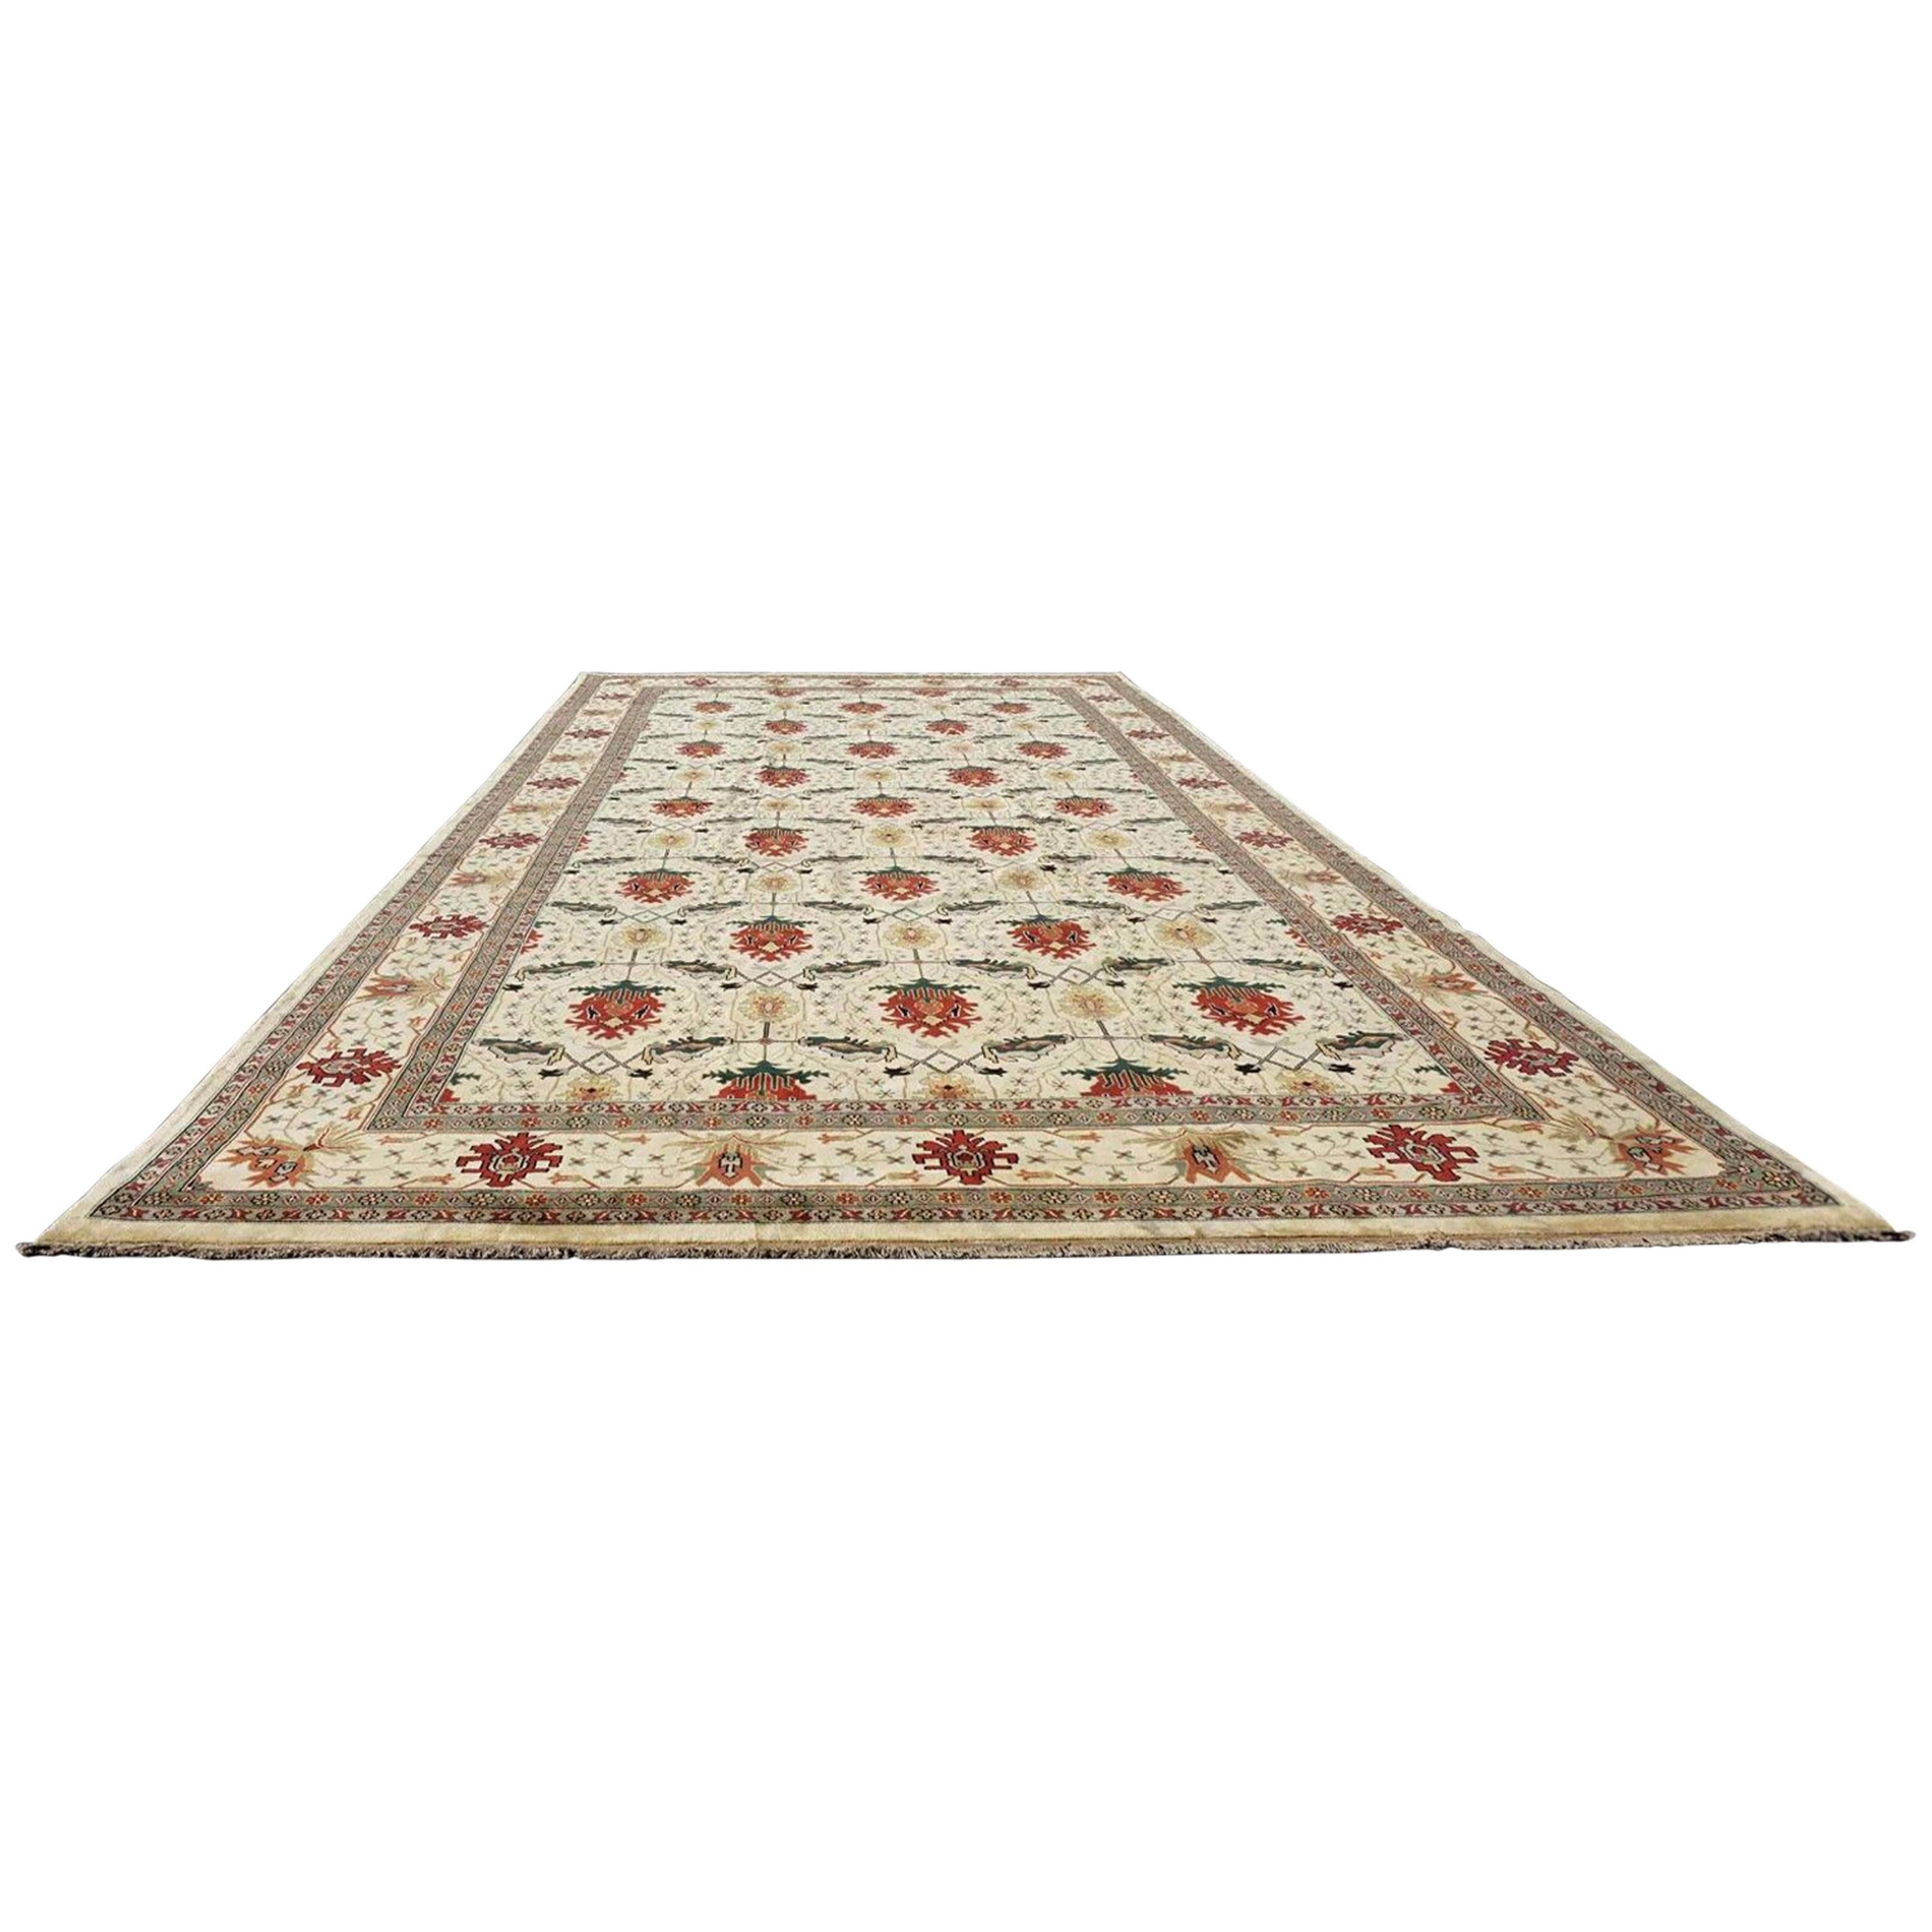 Art & Craft hand-knotted wool area rug

1990

Measures: 13'10